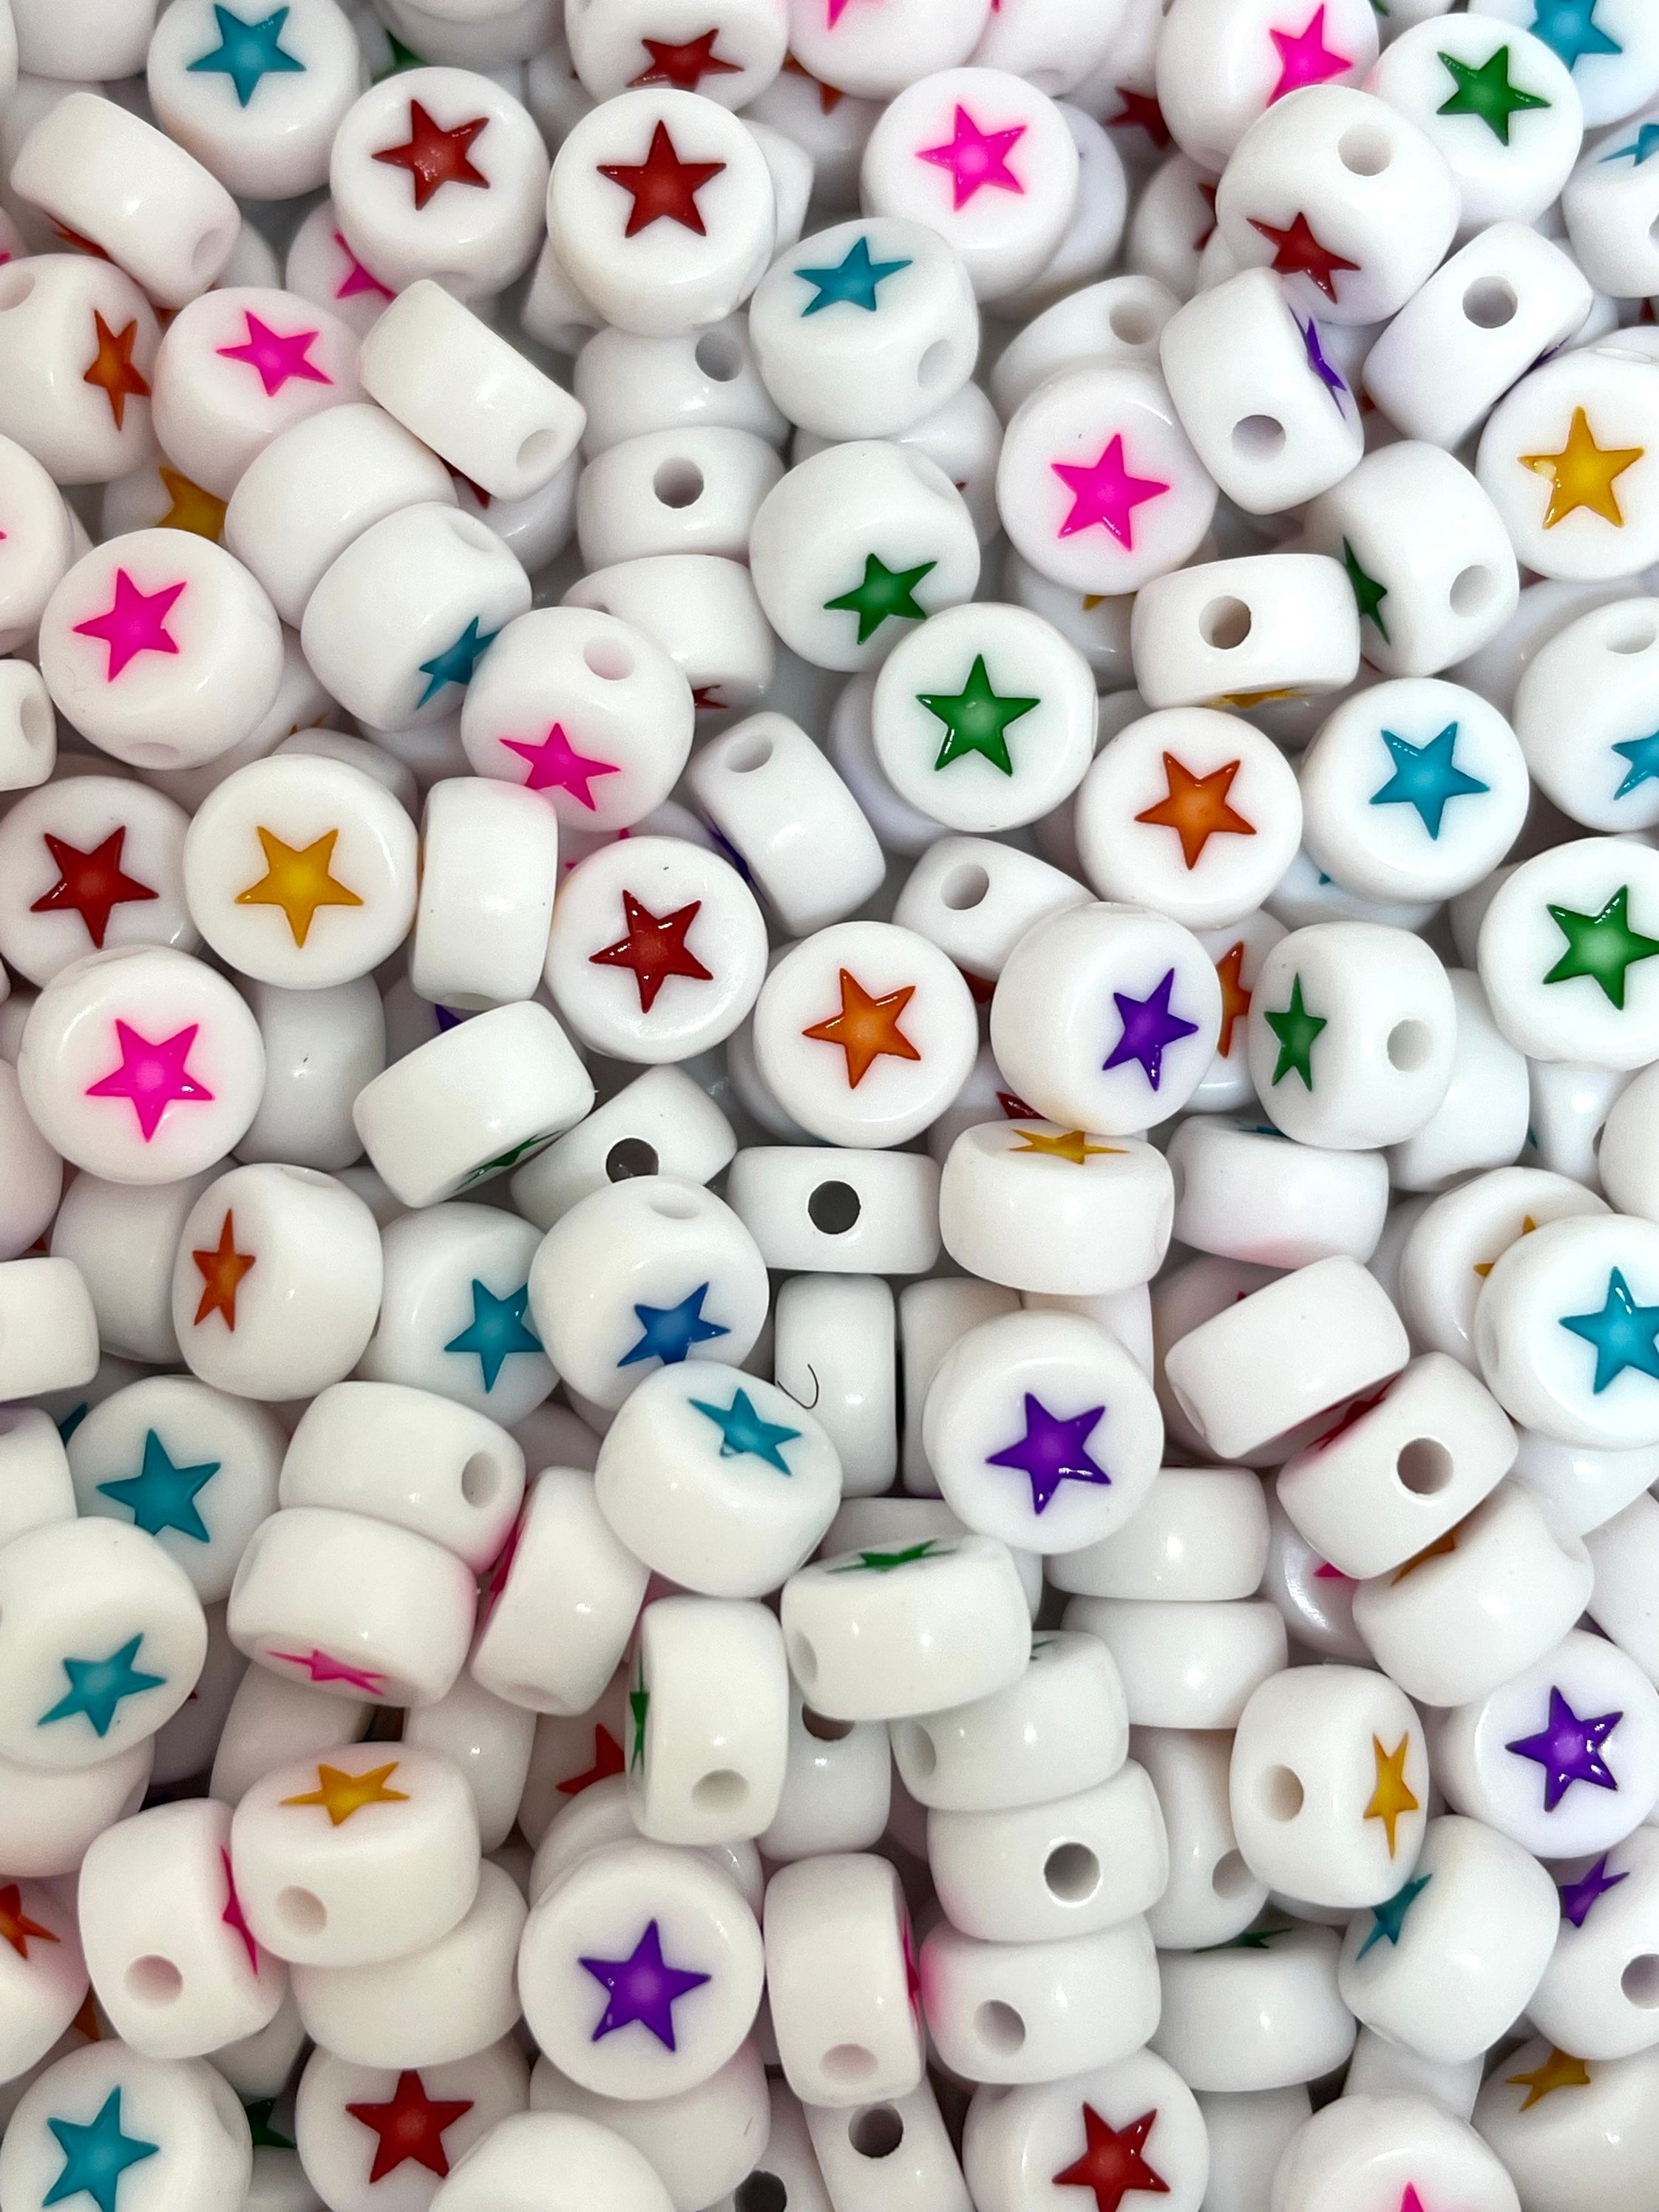 Colorful Star Spacer Beads, Coin Beads for Jewelry Making, Star Beads,  Decora Beads, Gyaru Beads, Lolita Beads for Jewelry Making